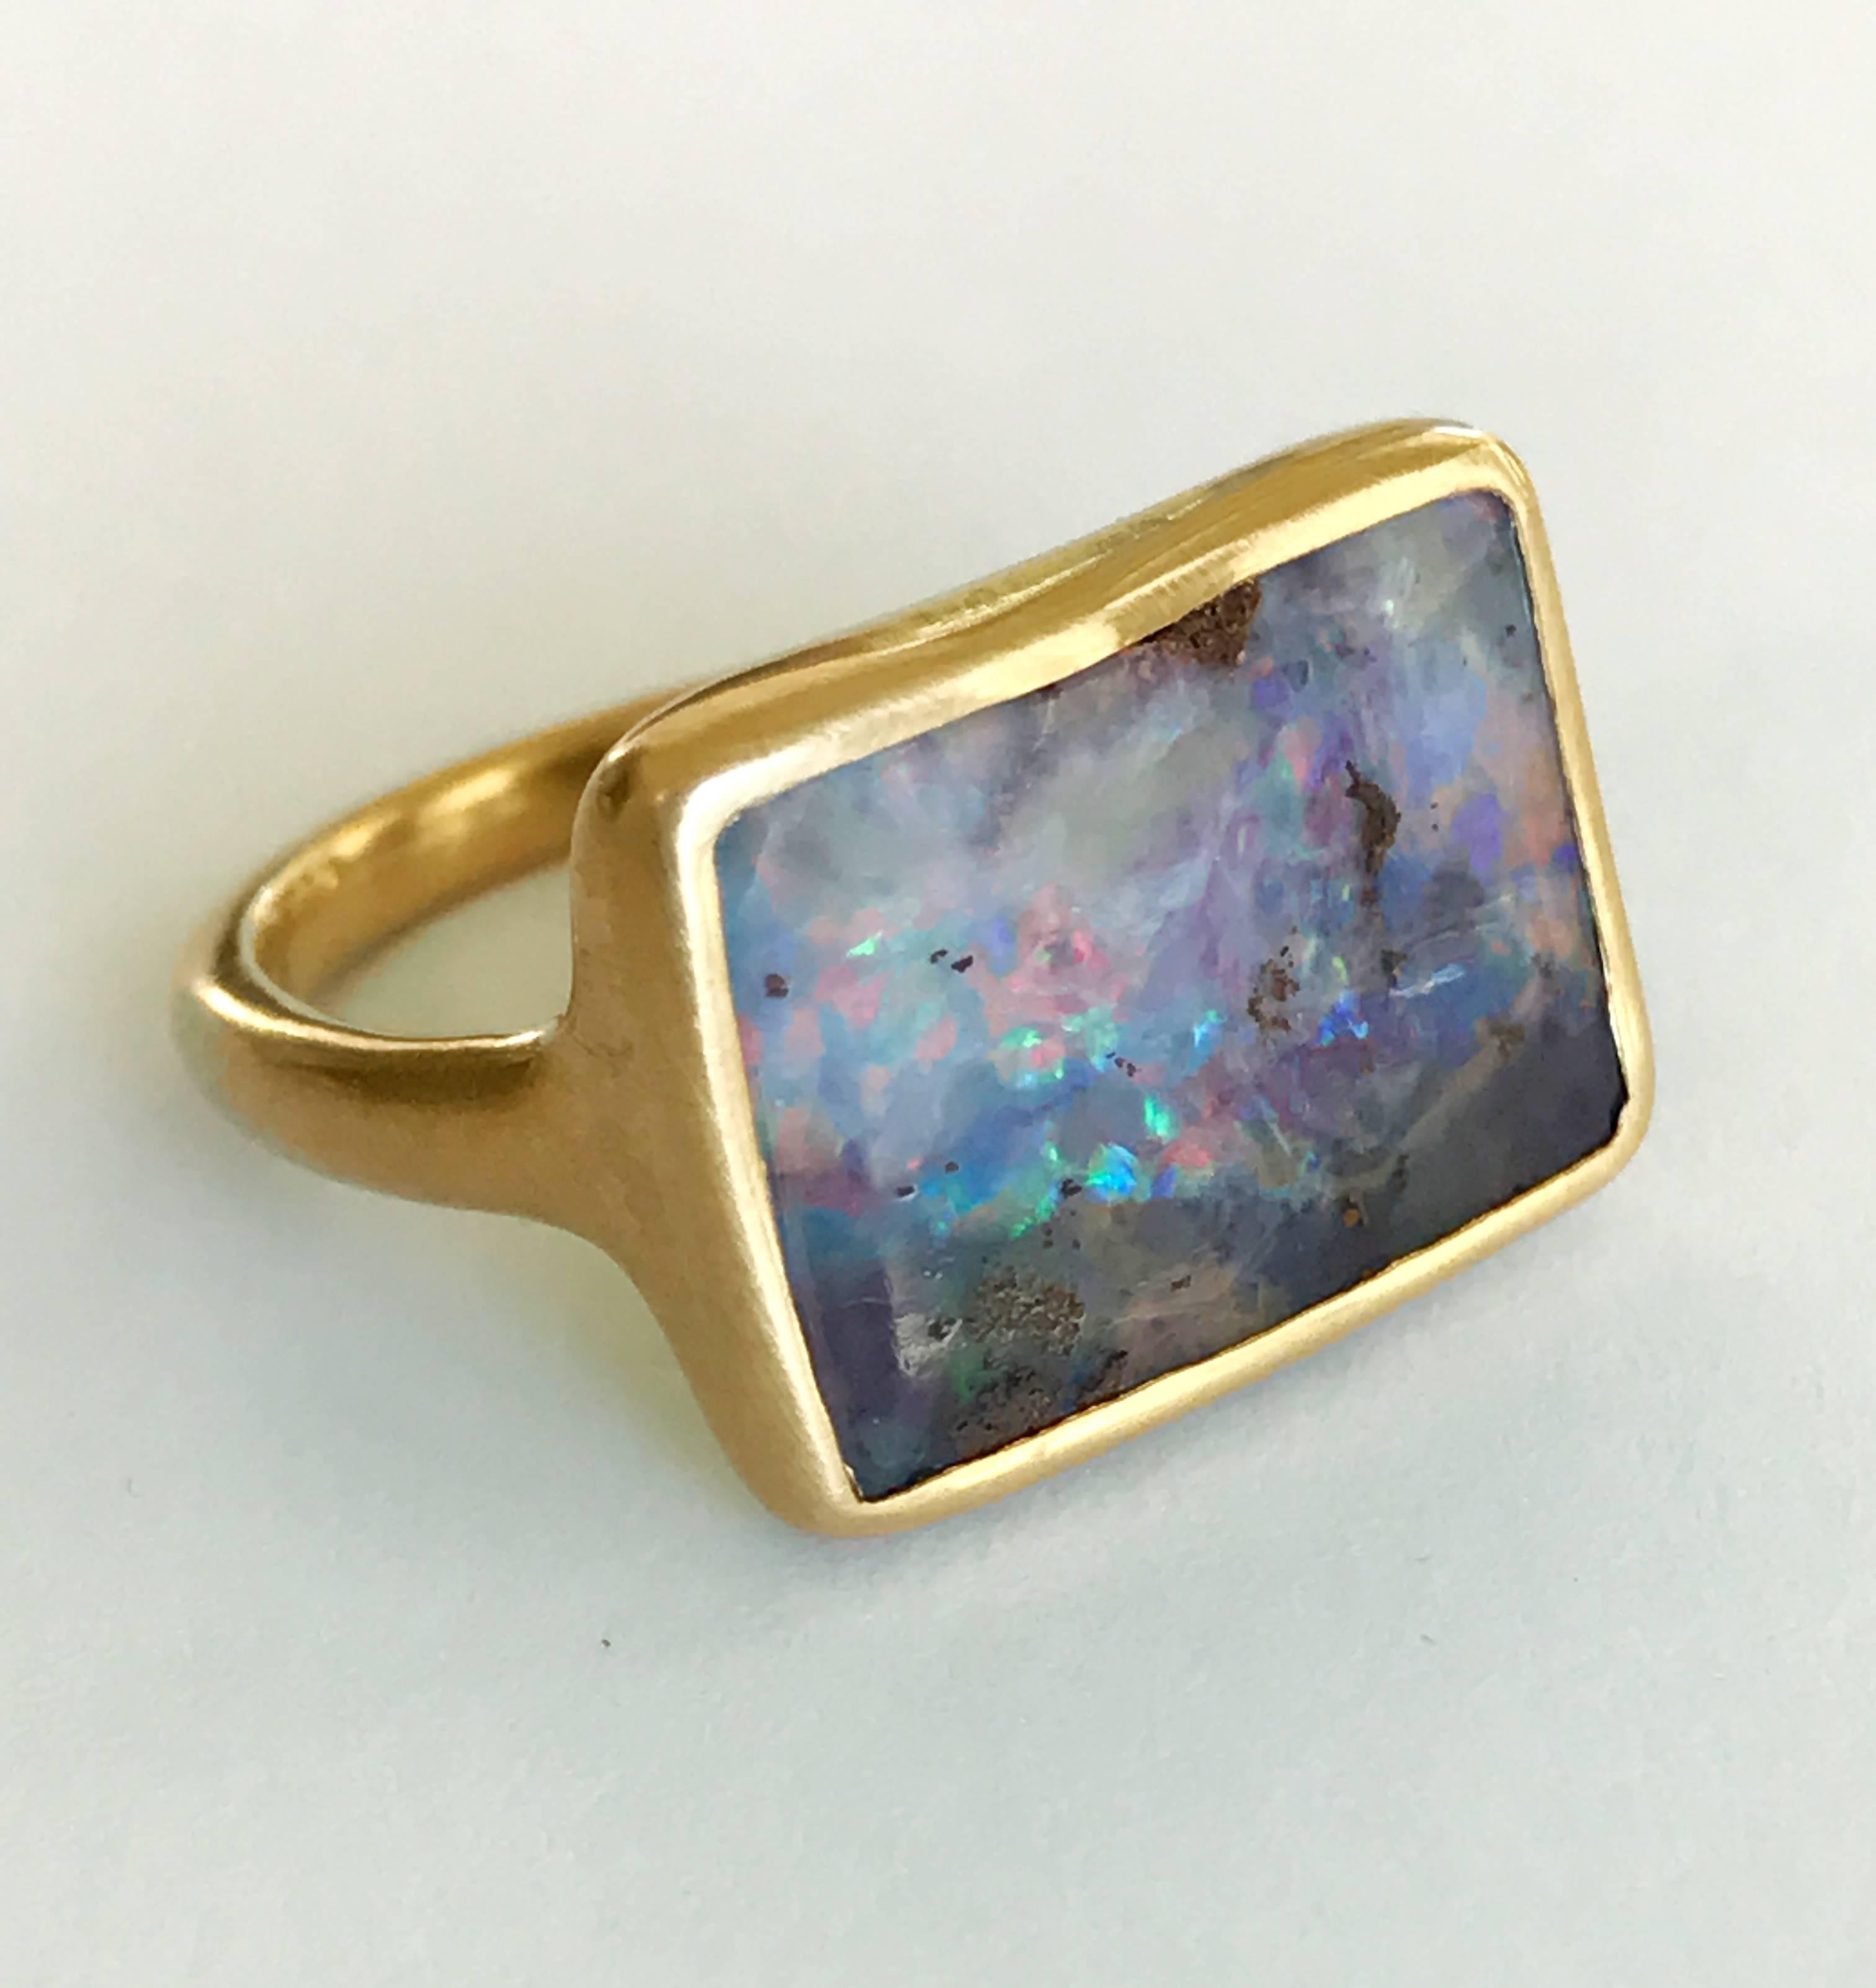 Dalben design One of a kind 18k yellow gold matte finishing ring with a bezel-set Boulder Opal. This Australian Bouder Opal have the colors of a wonderfull sunset. Ring size 6 3/4 USA  - 54 EU re-sizable to most finger sizes. 
Bezel setting